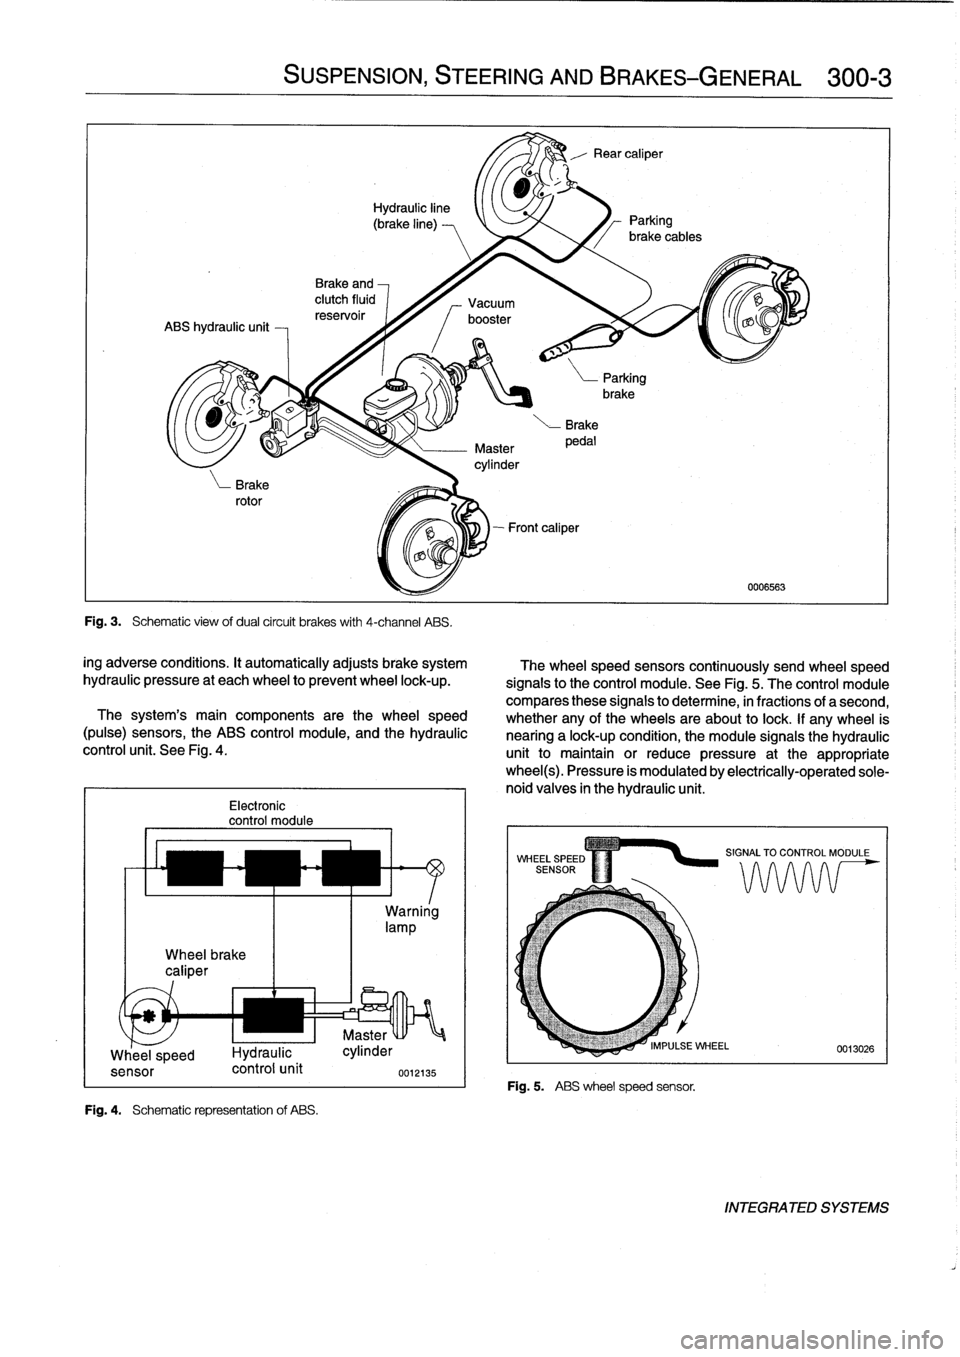 BMW 323i 1993 E36 User Guide 
Wheel
brake
caliper

Electronic
control
module
Fig
.
4
.

	

Schematic
representation
of
ABS
.

SUSPENSION,
STEERING
ANDBRAKES-GENERAL

	

300-3

Fig
.
3
.

	

Schematic
view
ofdual
circuit
brakes
wi